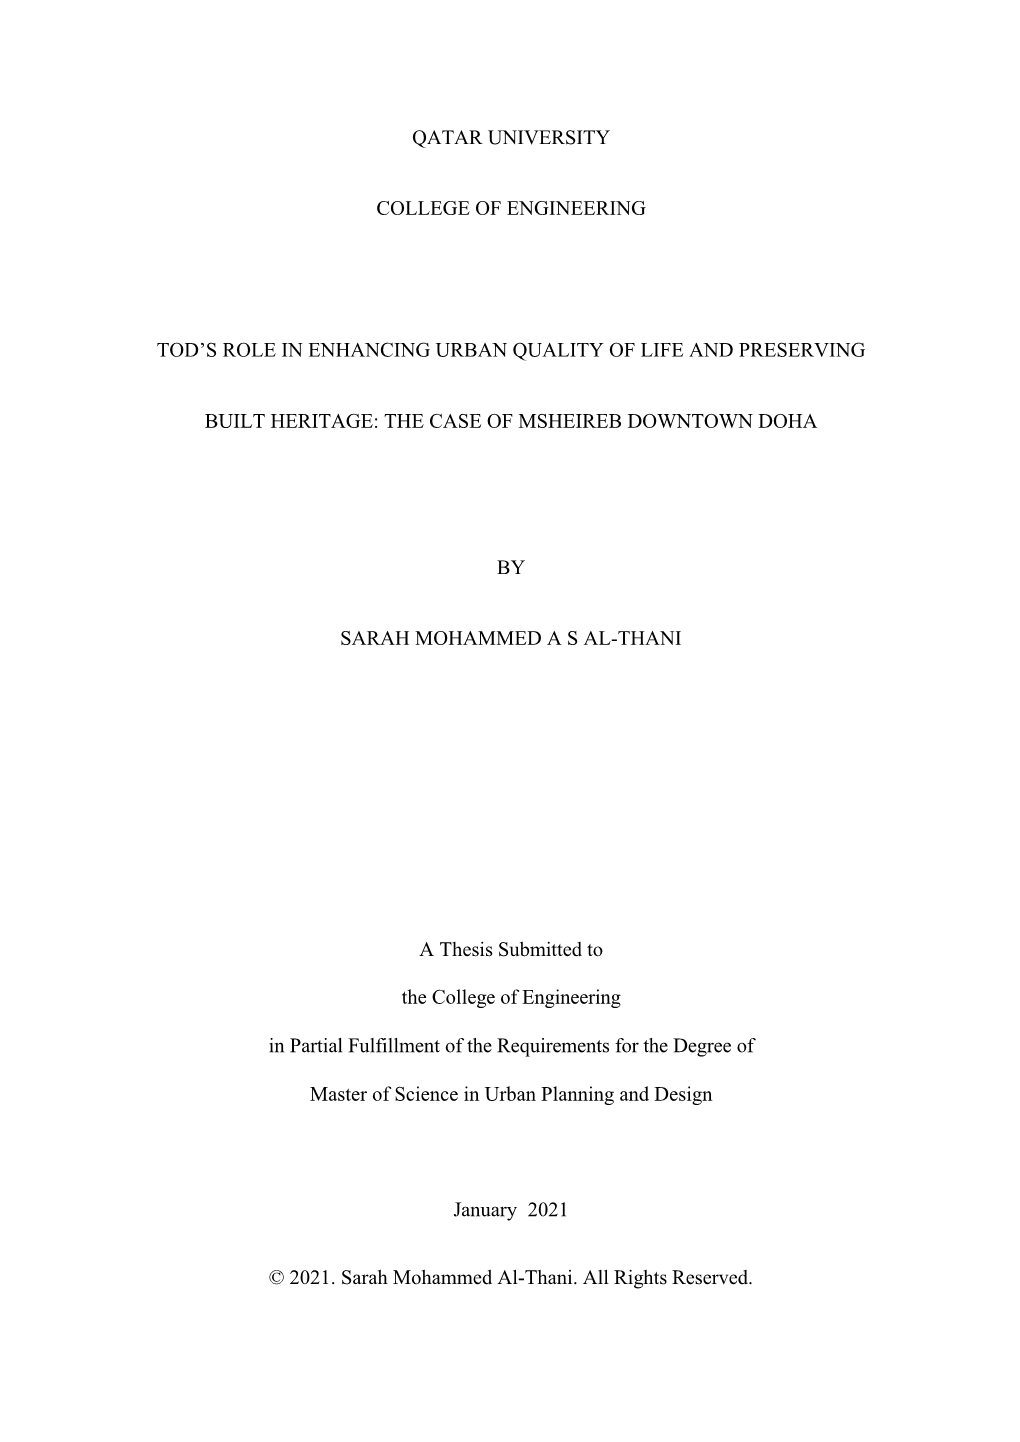 Sarah Al-Thani OGS Approved Thesis